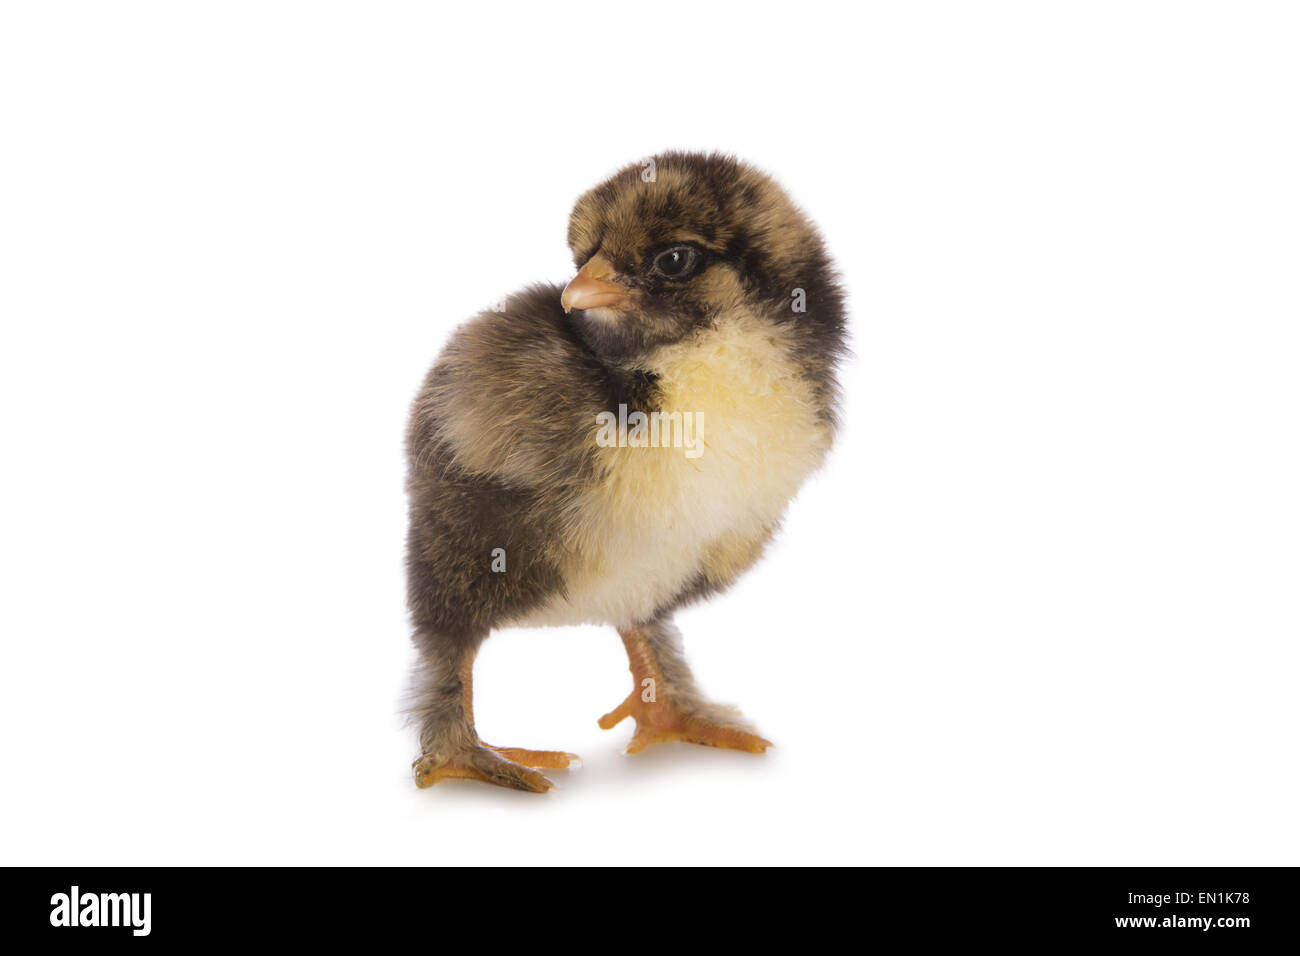 Gold laced Brahma chick isolated on white Banque D'Images